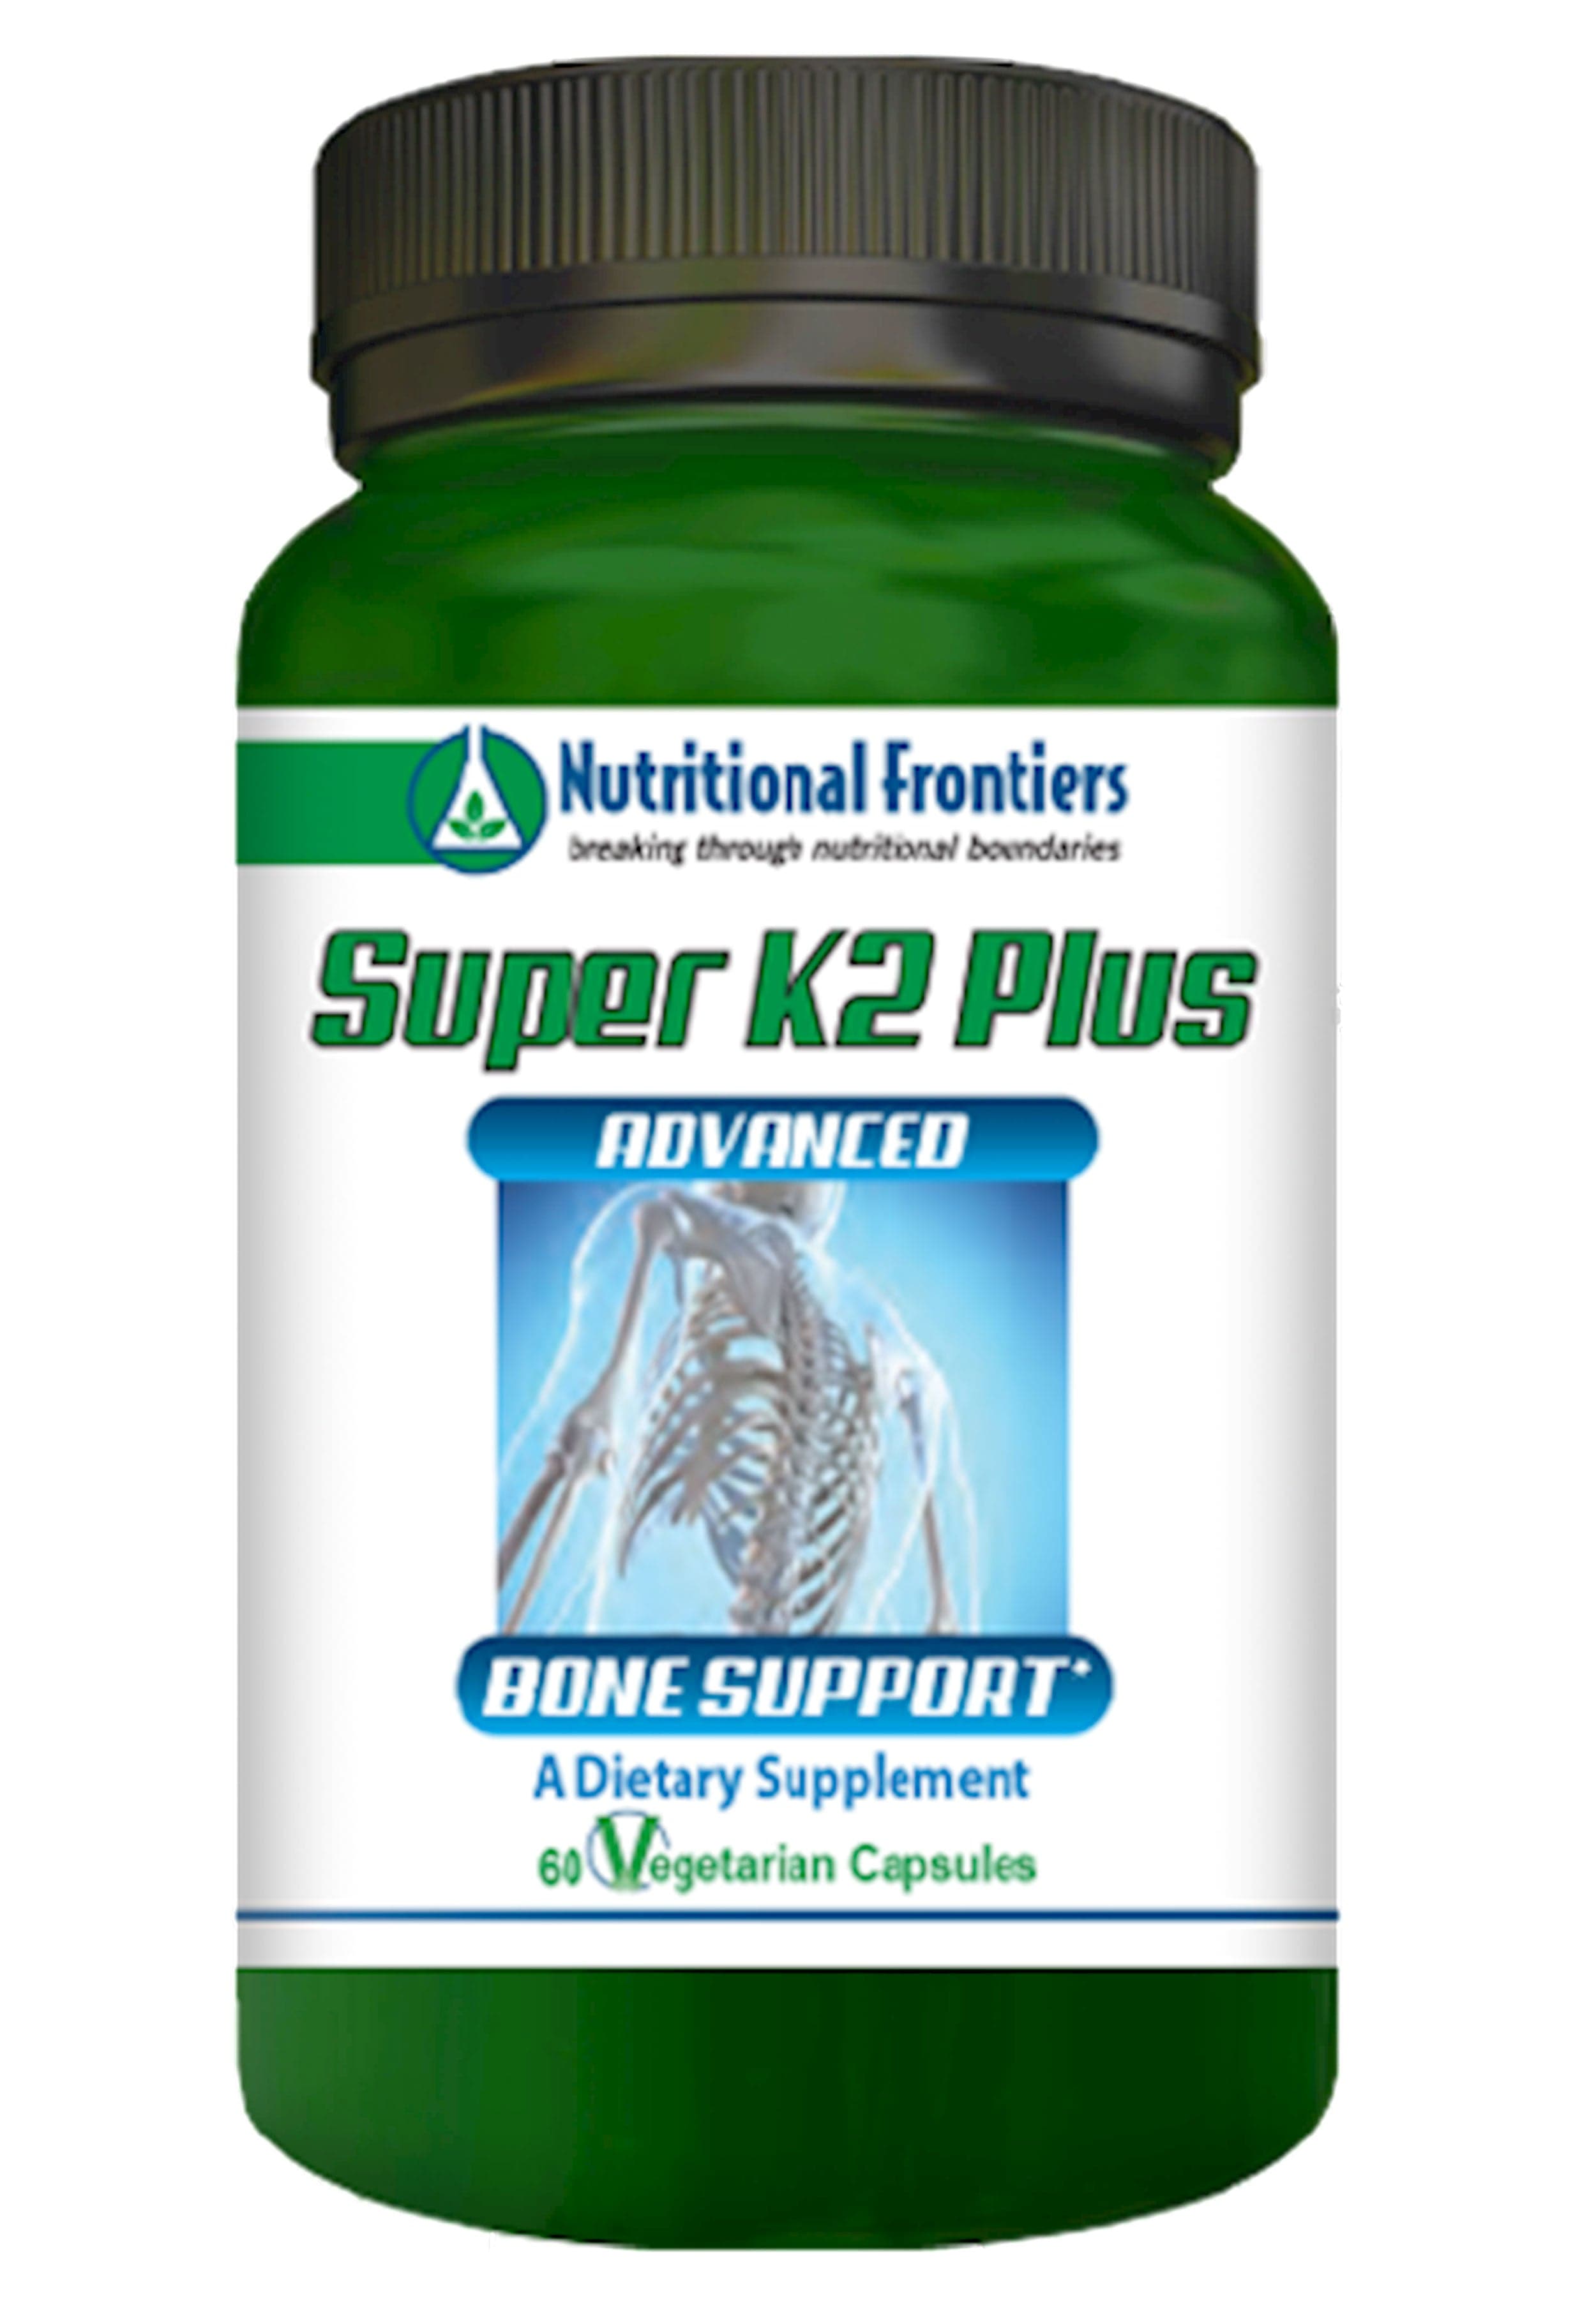 Nutritional Frontiers Super K2 Plus (Formerly K2+)